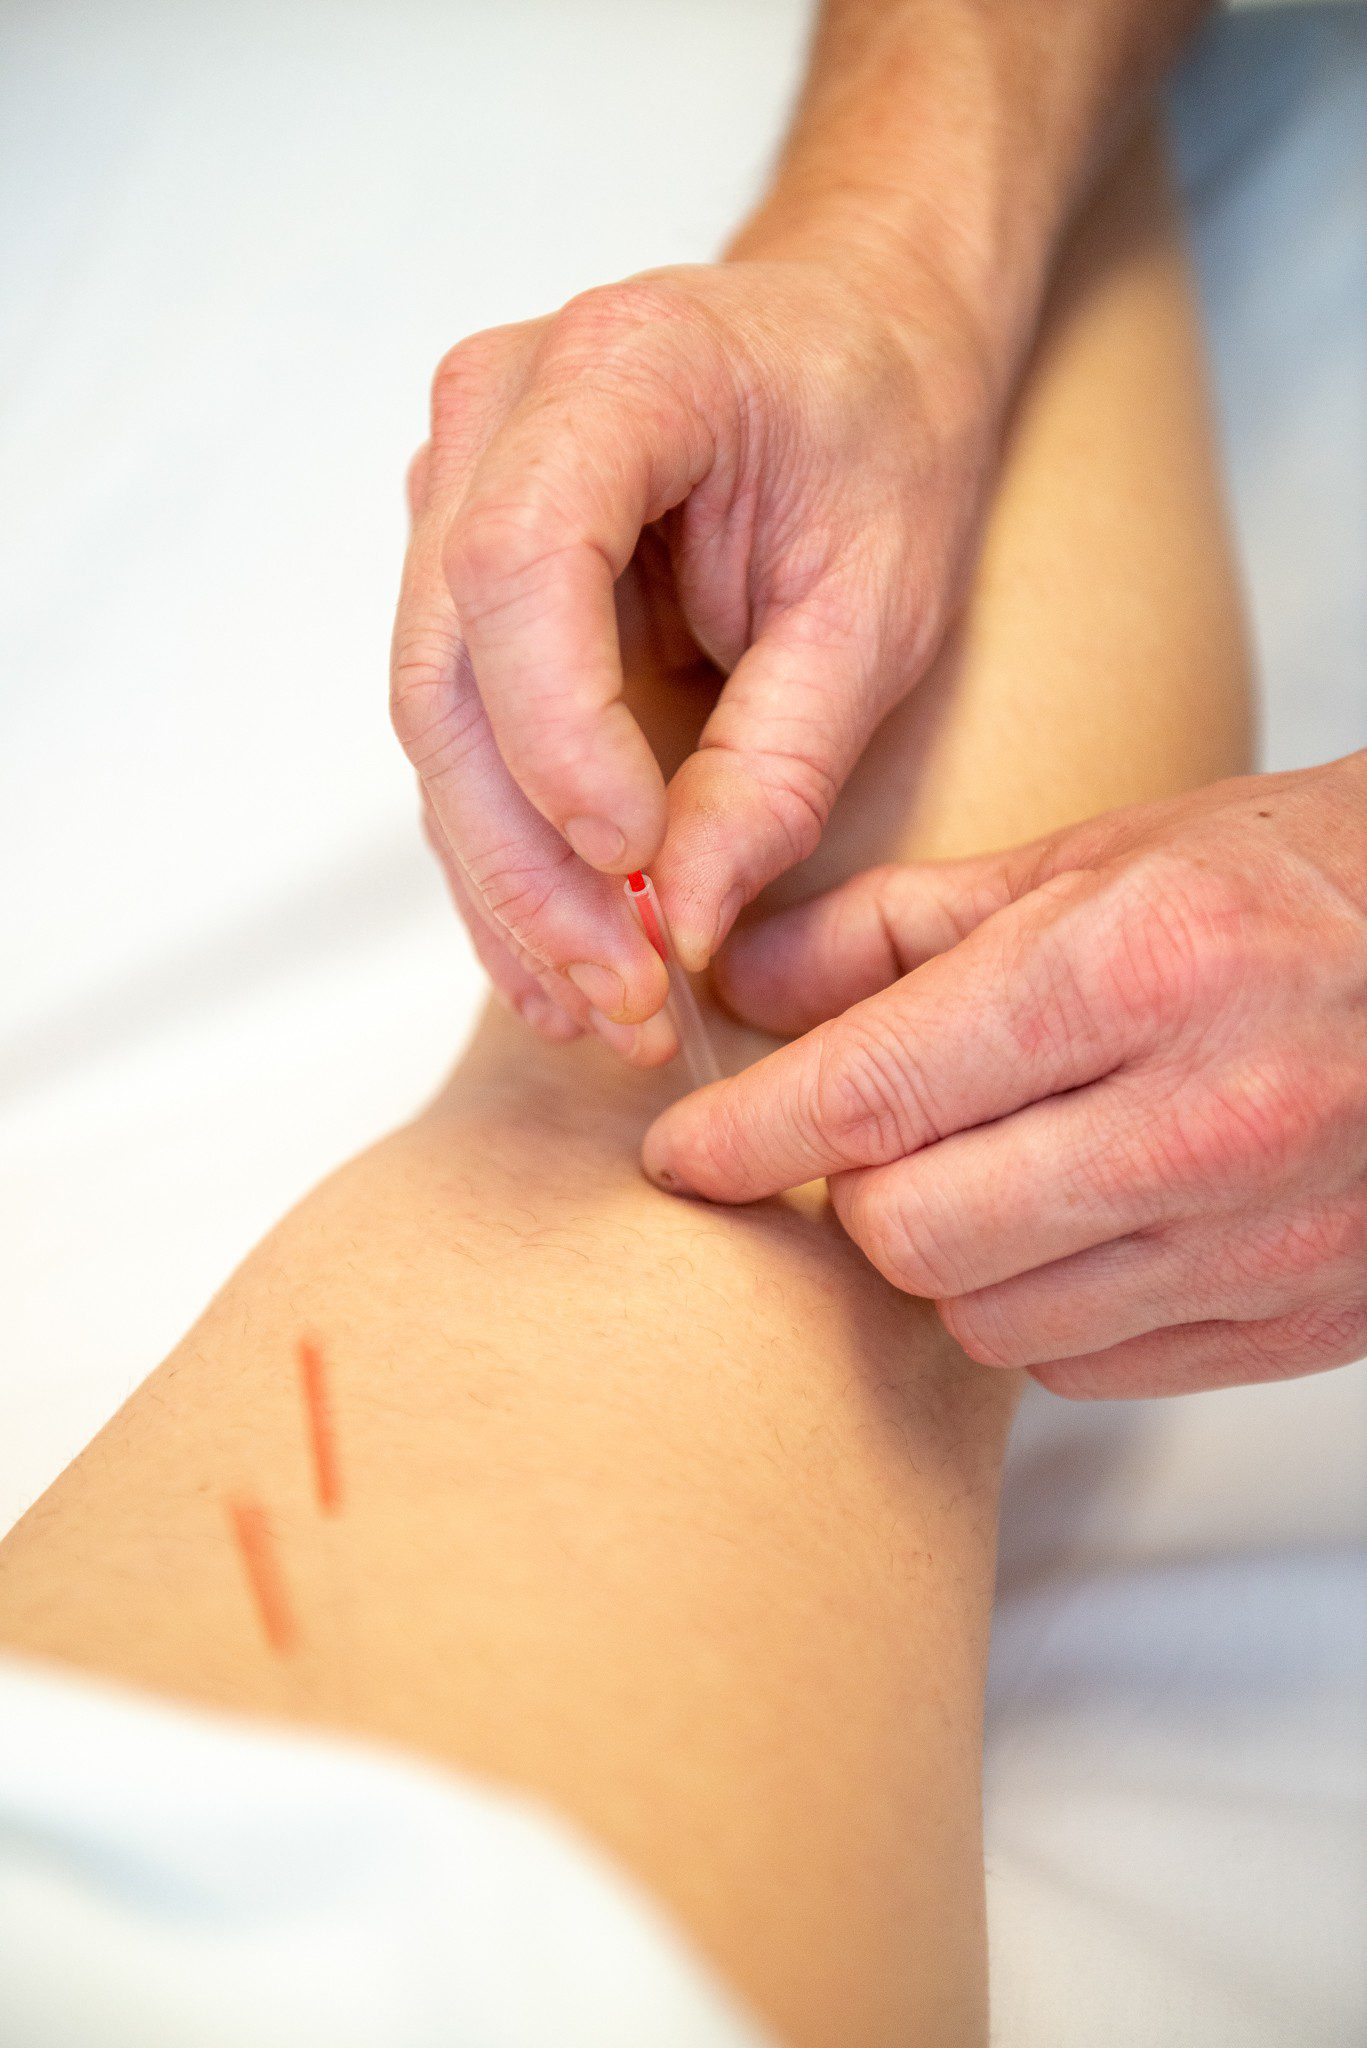 Acupuncture Vs. Dry Needling- Are They The Same?